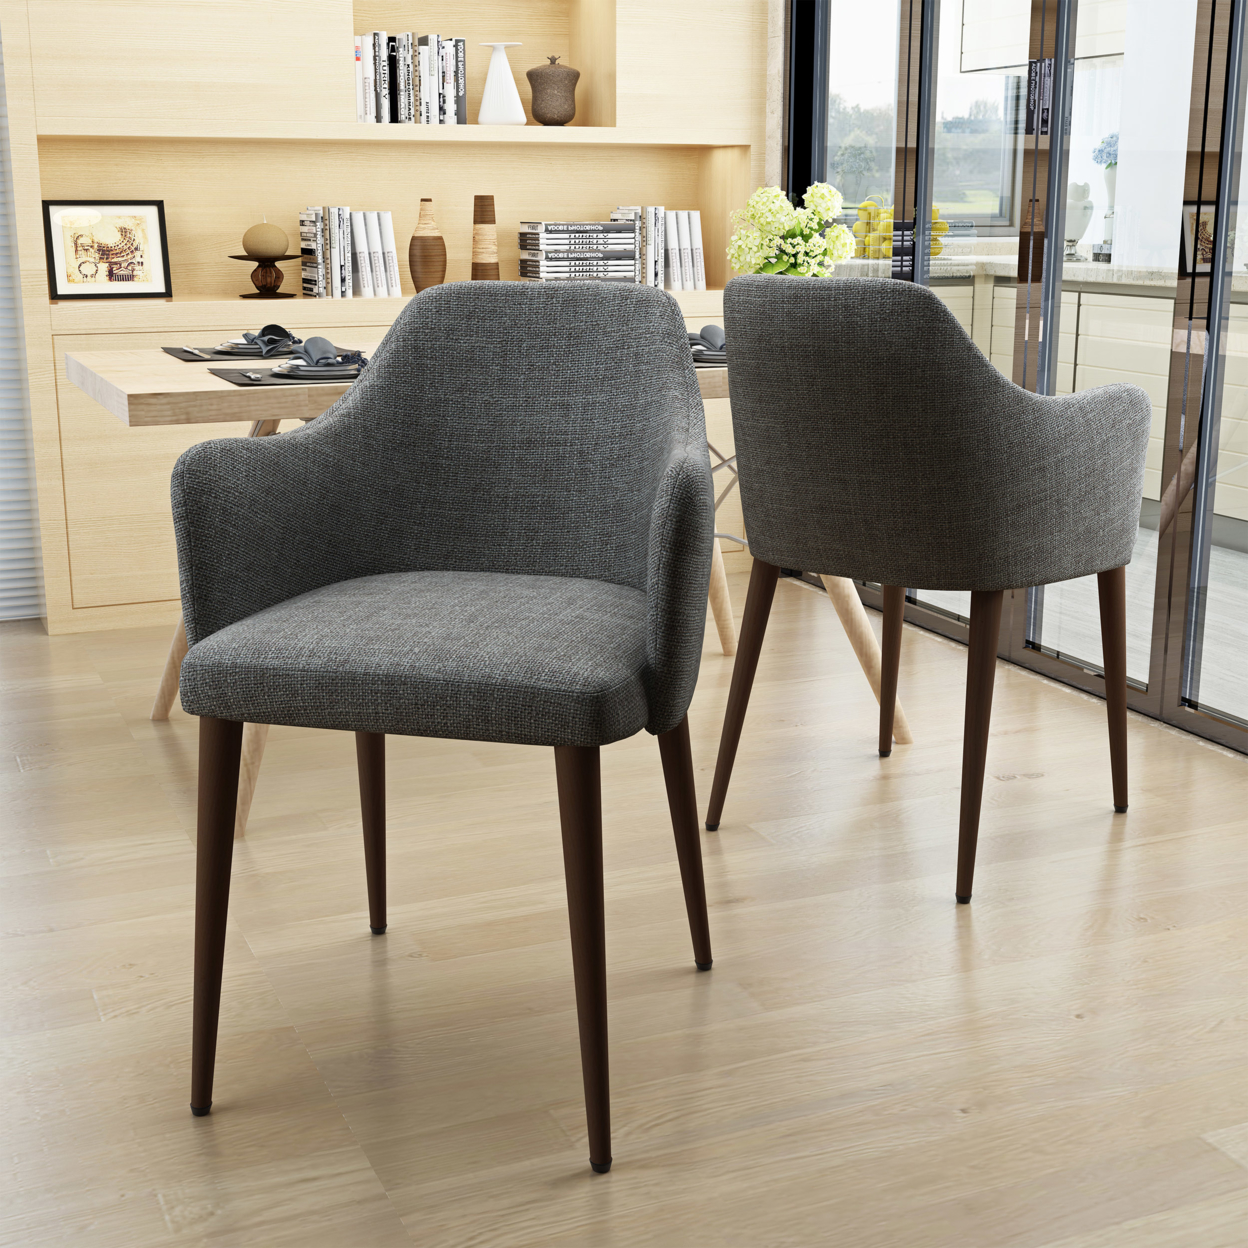 Nande Mid Century Fabric Dining Chairs With Wood Finished Legs - Set Of 2 - Light Gray/Dark Walnut